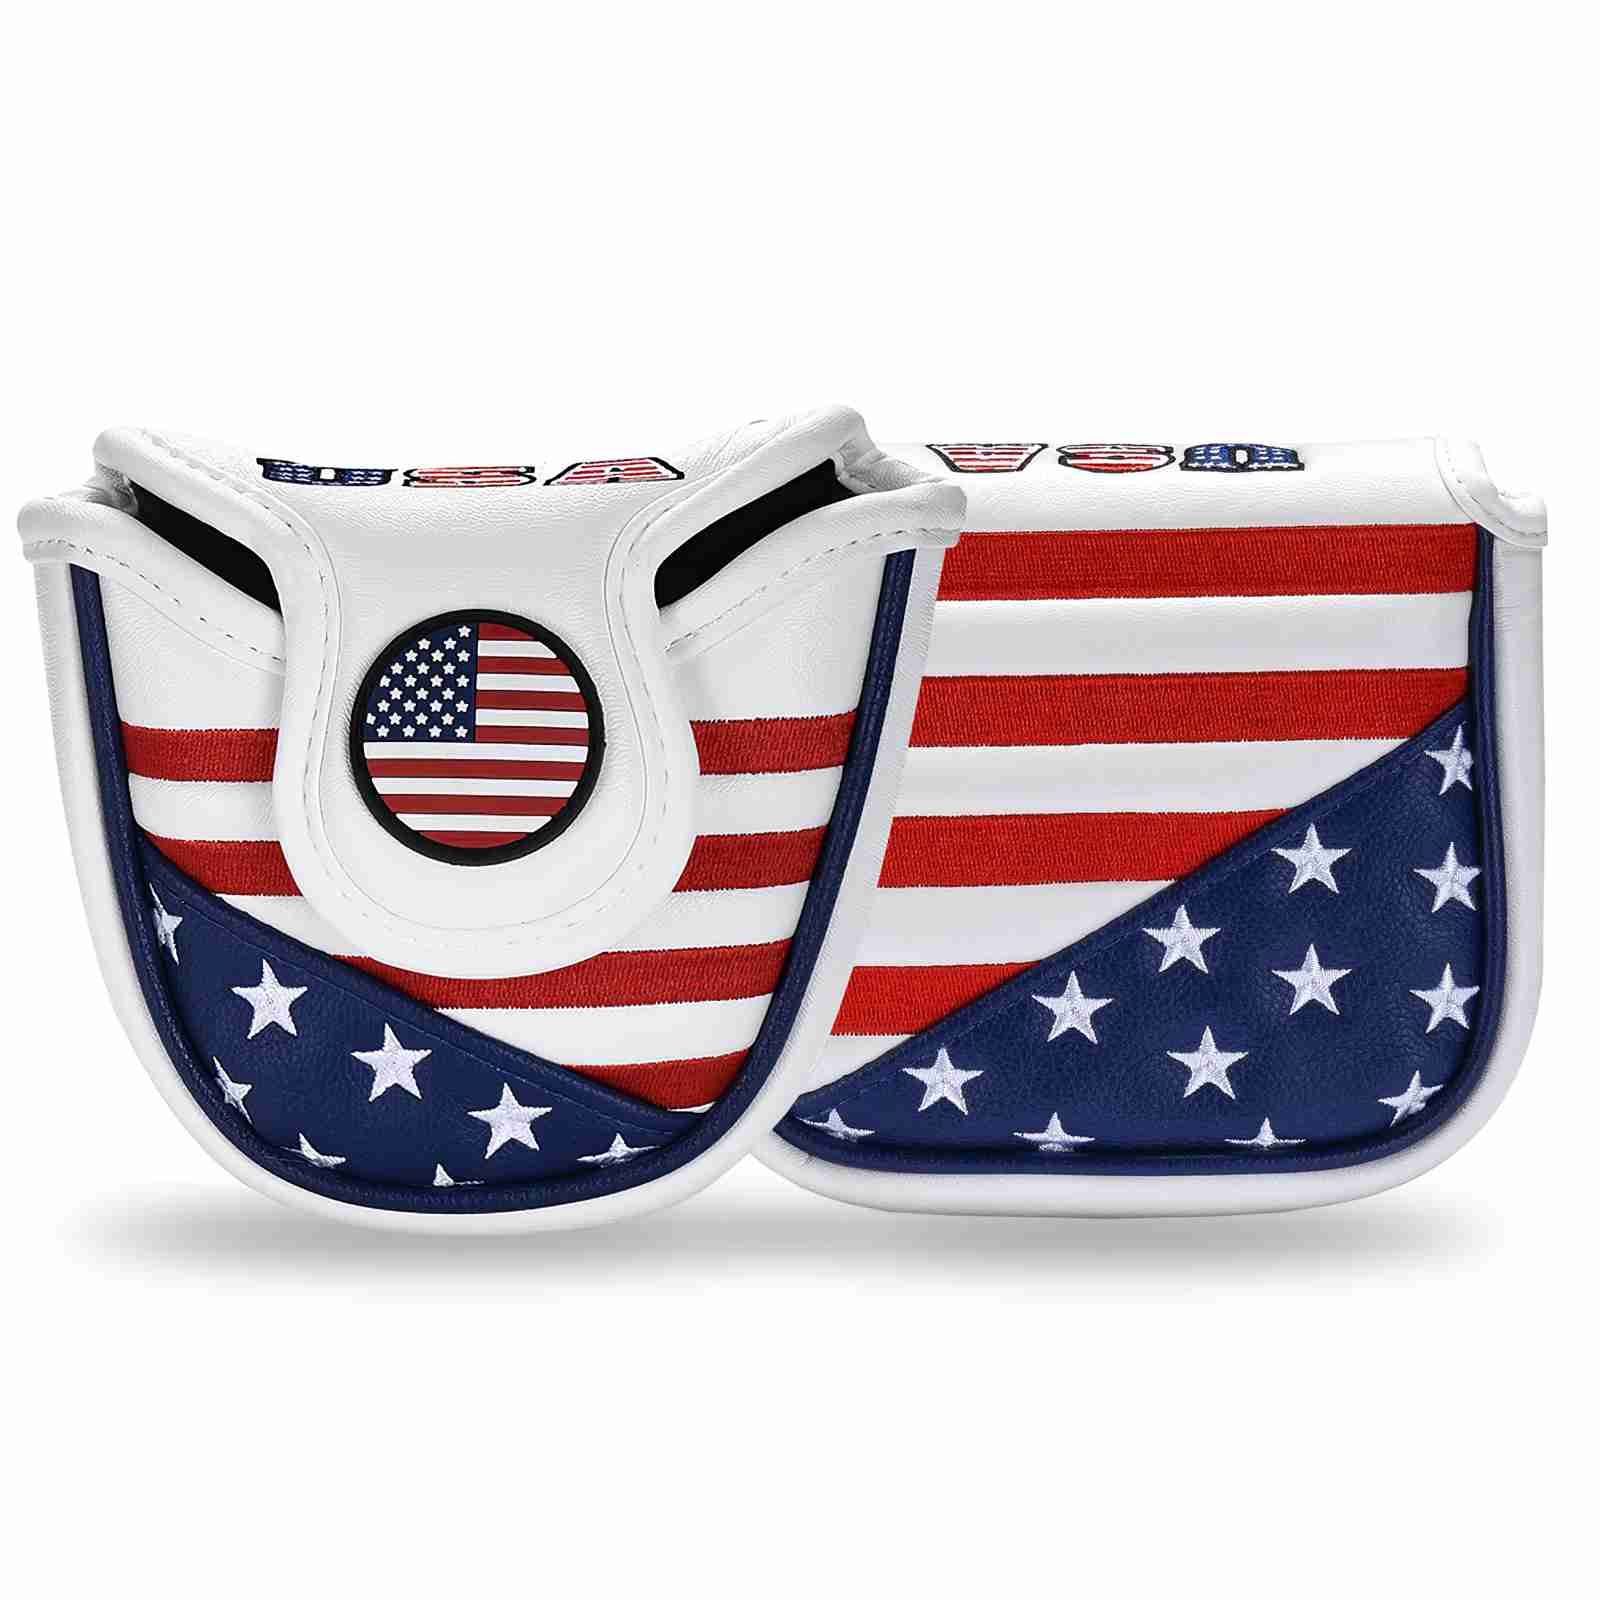 odyssey-putter-cover with cash back rebate